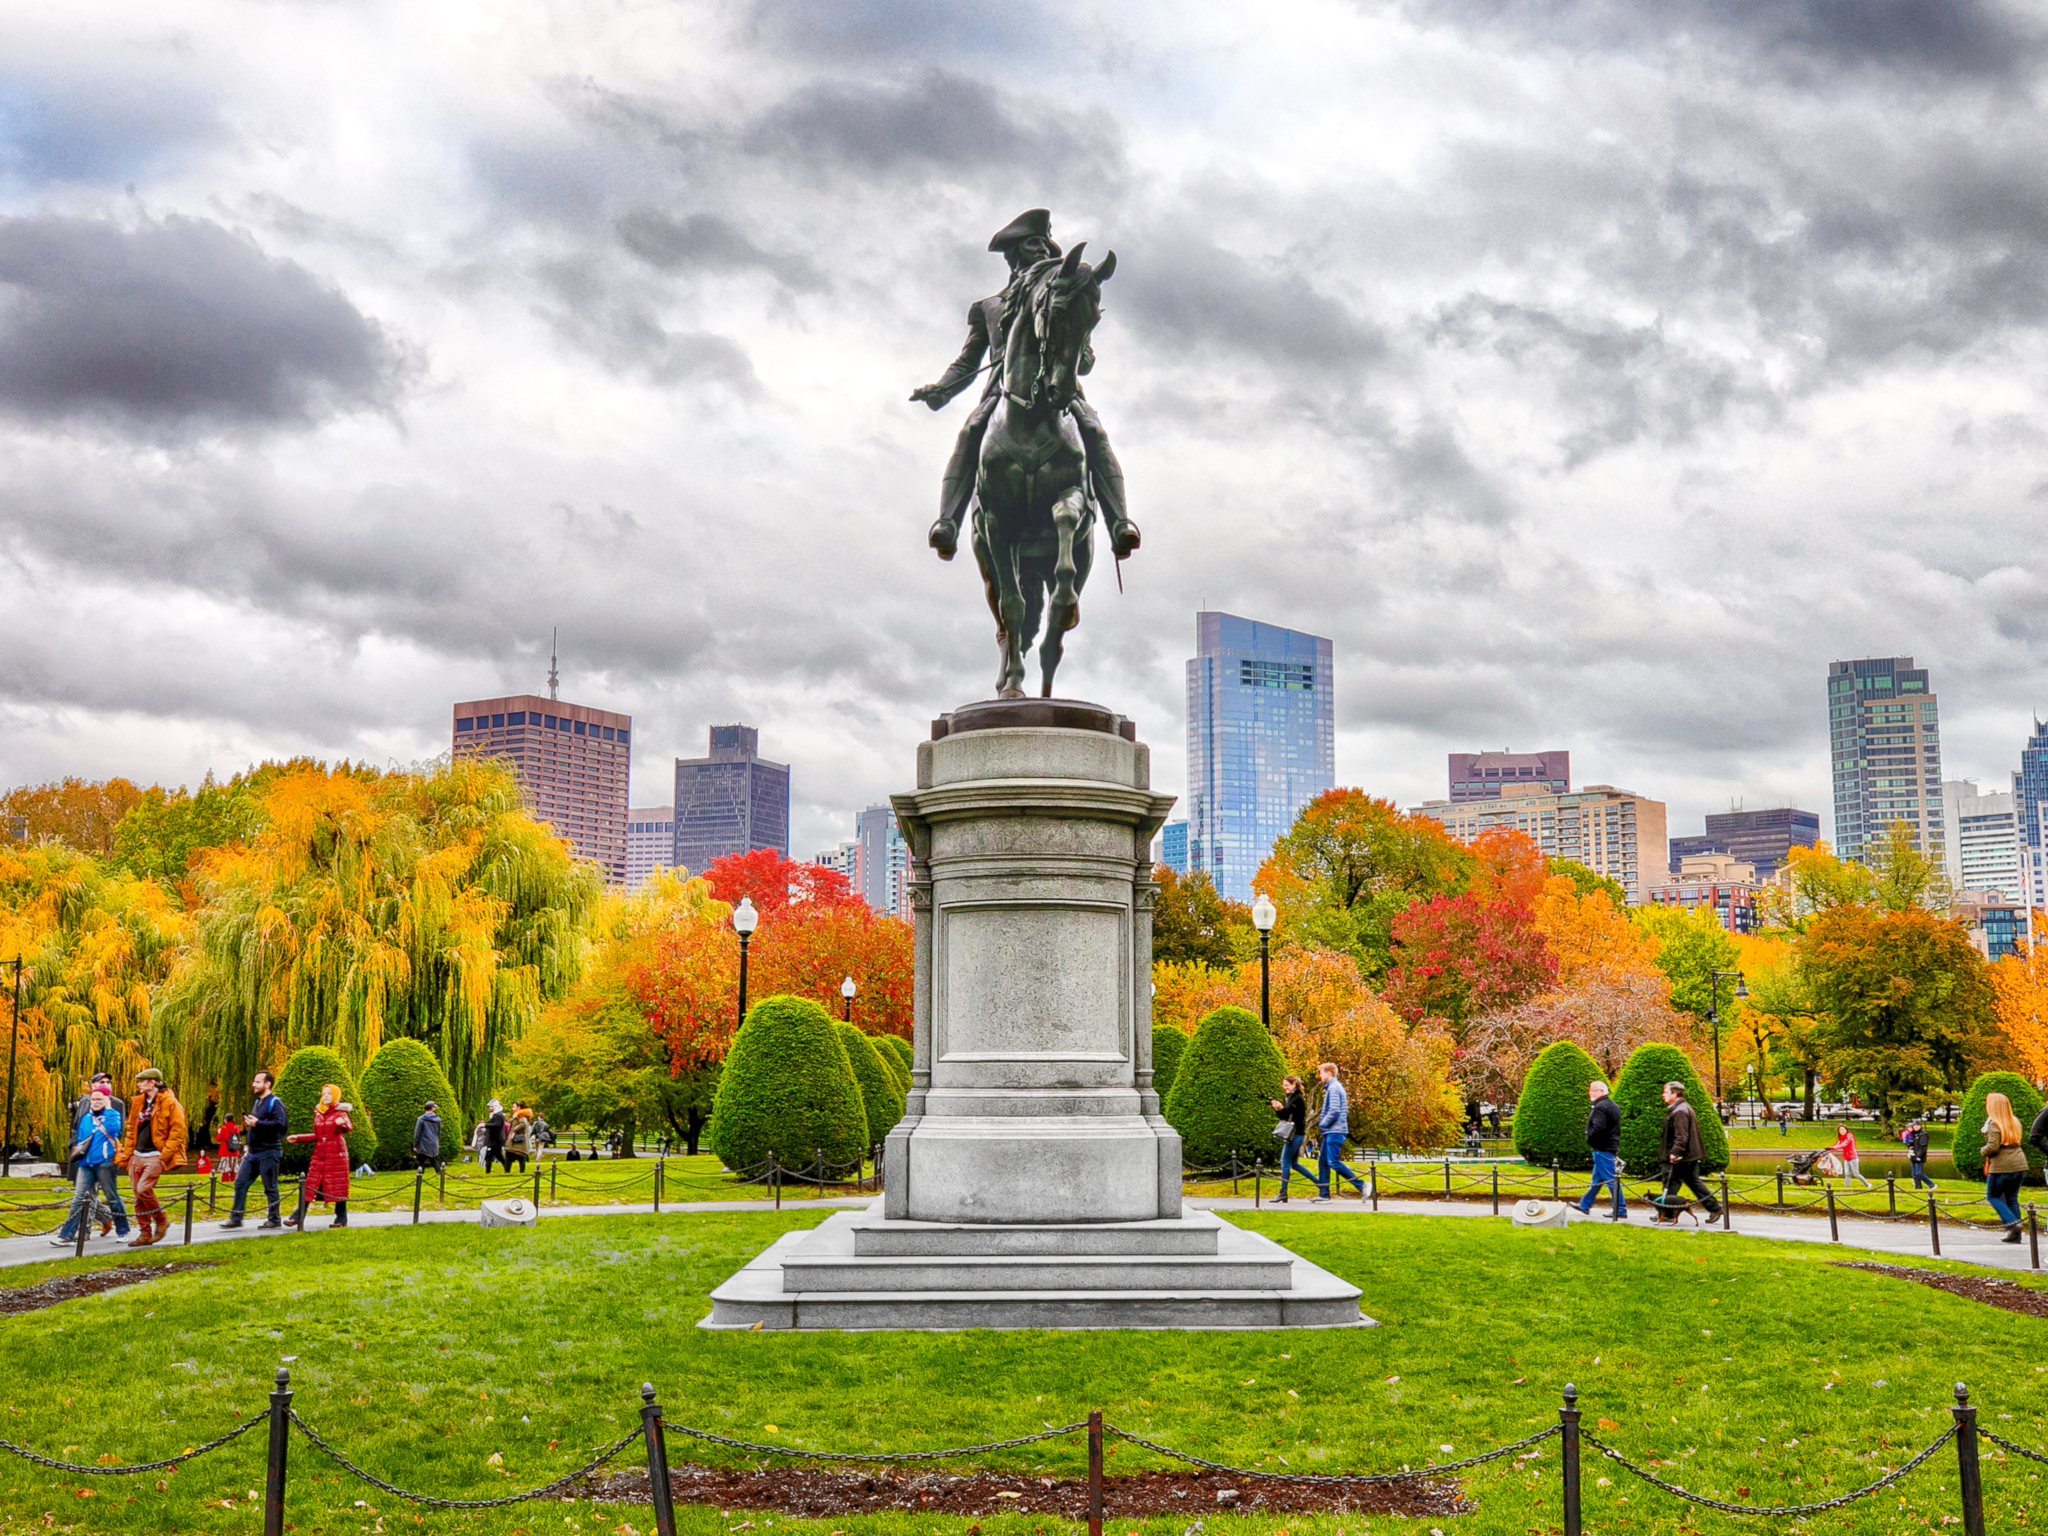 10 Best Places One Must Go For Shopping In Boston!